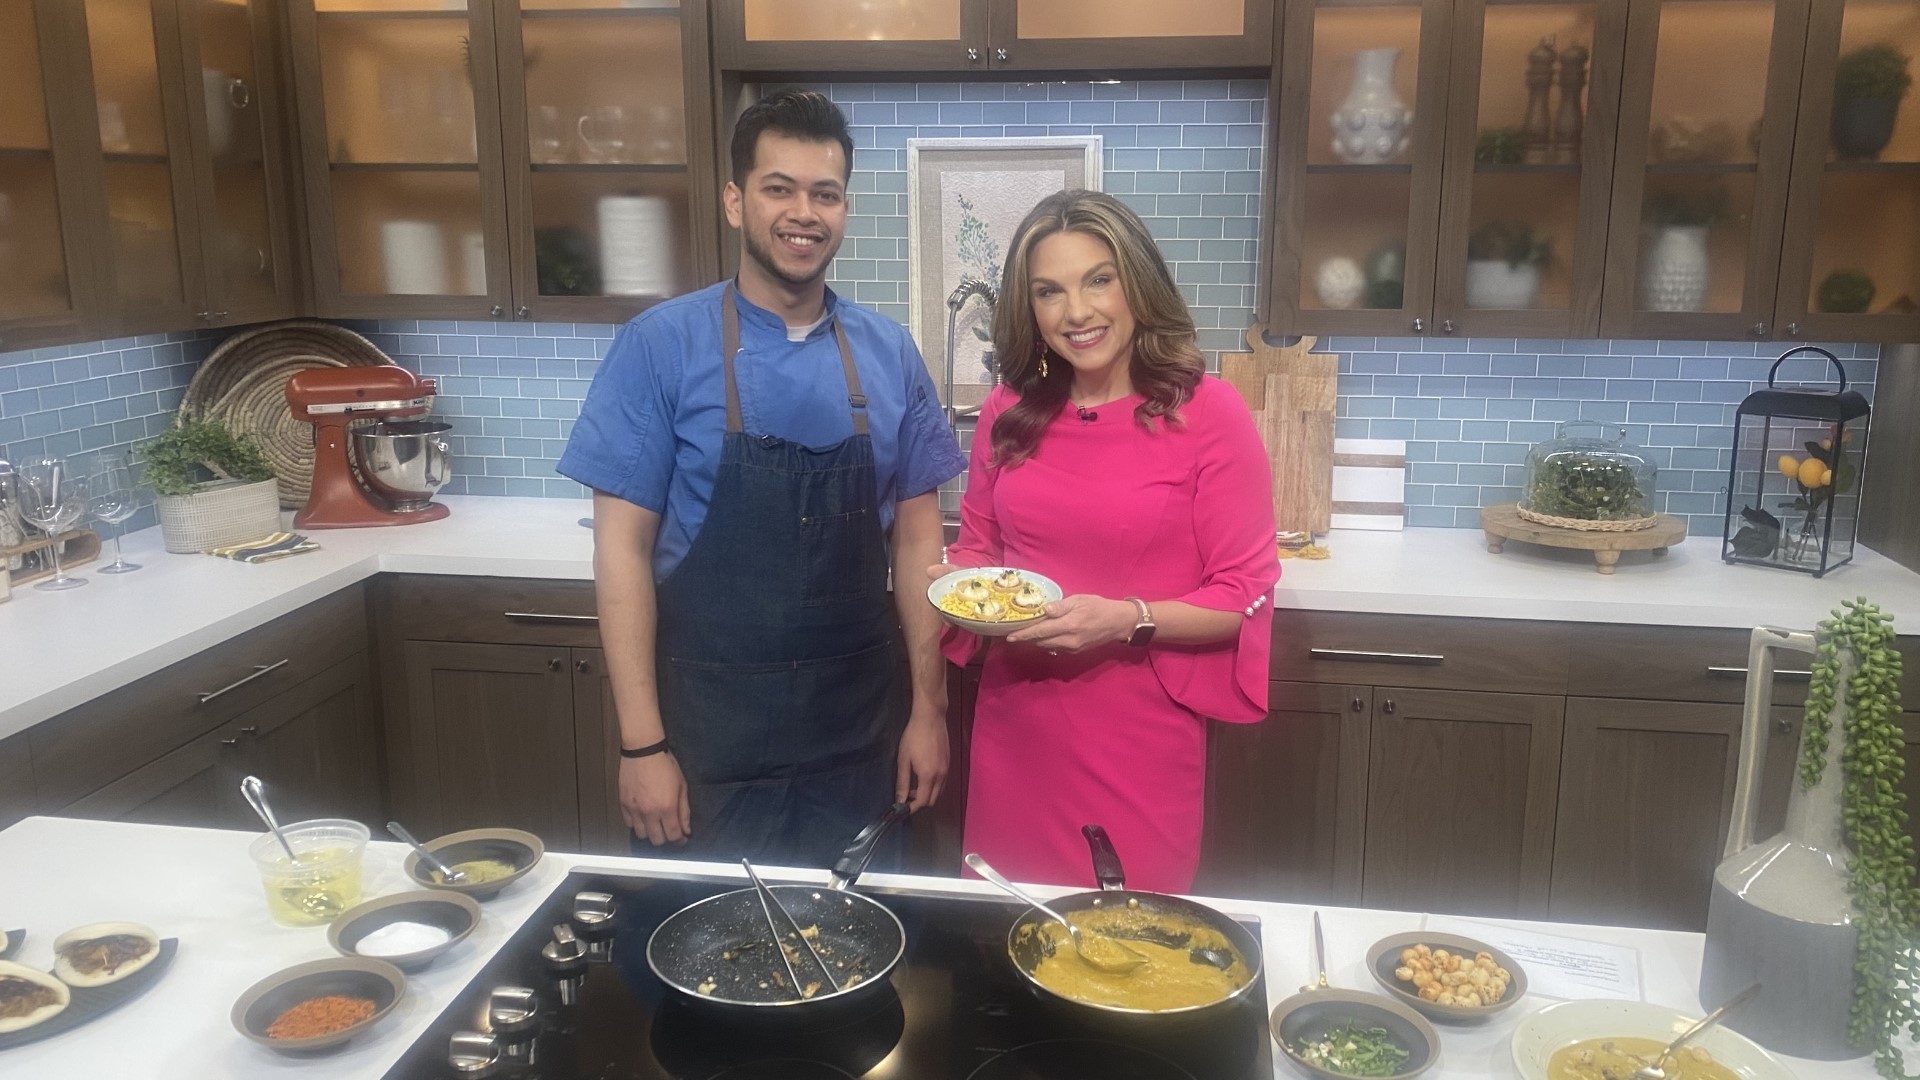 Rasai in Fremont launched an a la carte menu. Executive Chef Gaurav Raj made wild mushroom korma and showed off dishes from their spring menu.